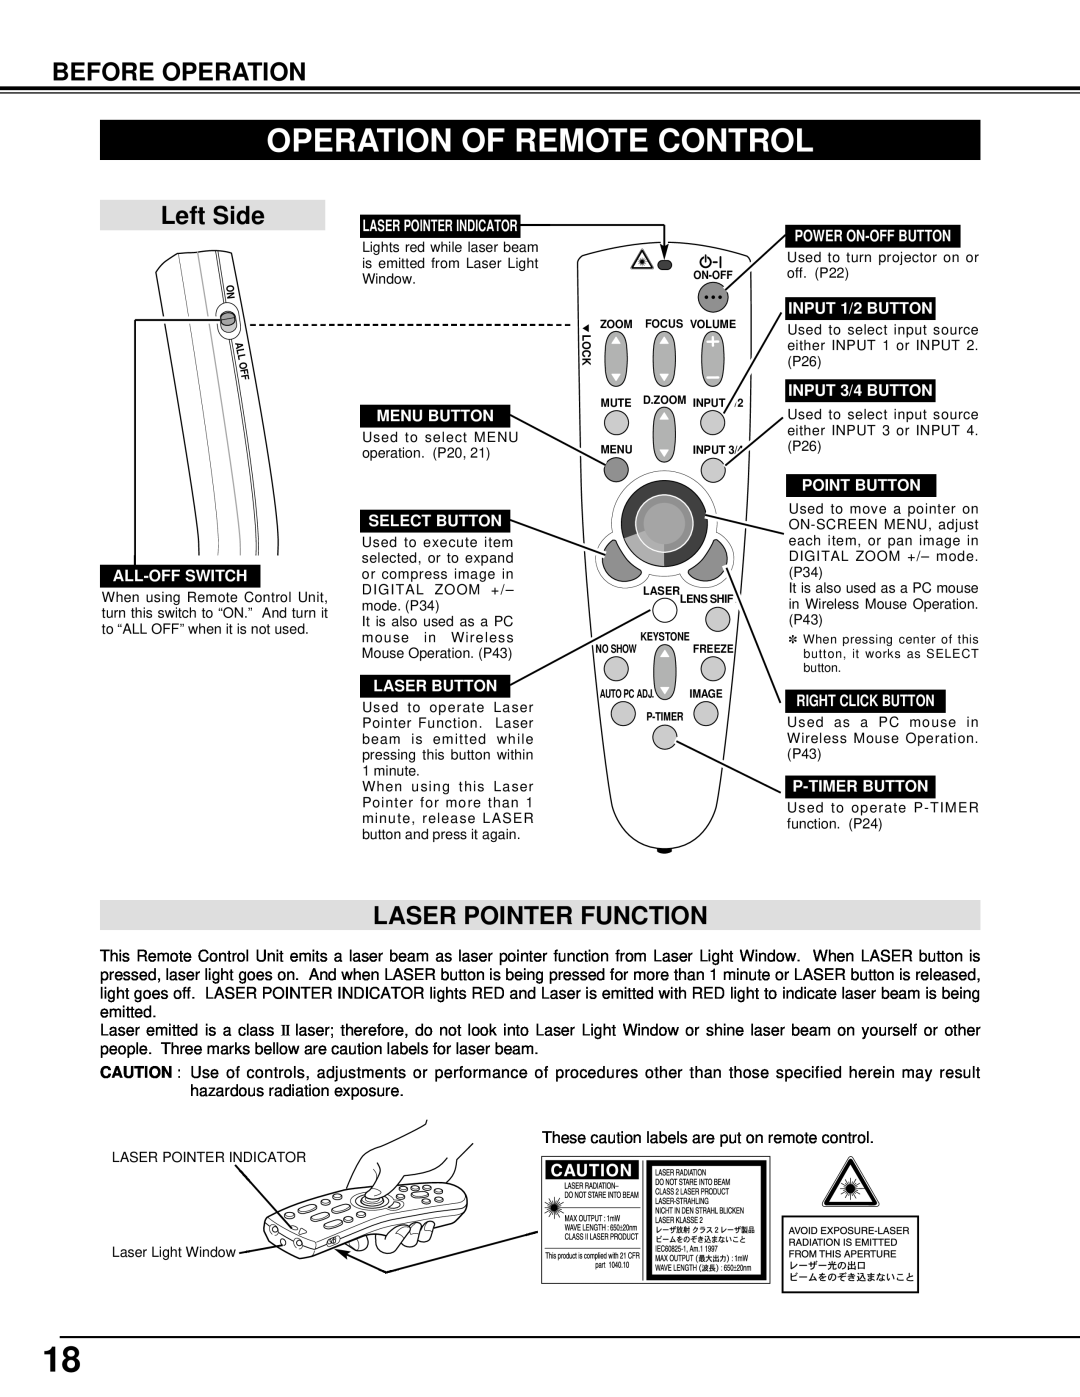 Eiki LC-UXT1 instruction manual Operation Of Remote Control, Left Side, Laser Pointer Function, Before Operation 